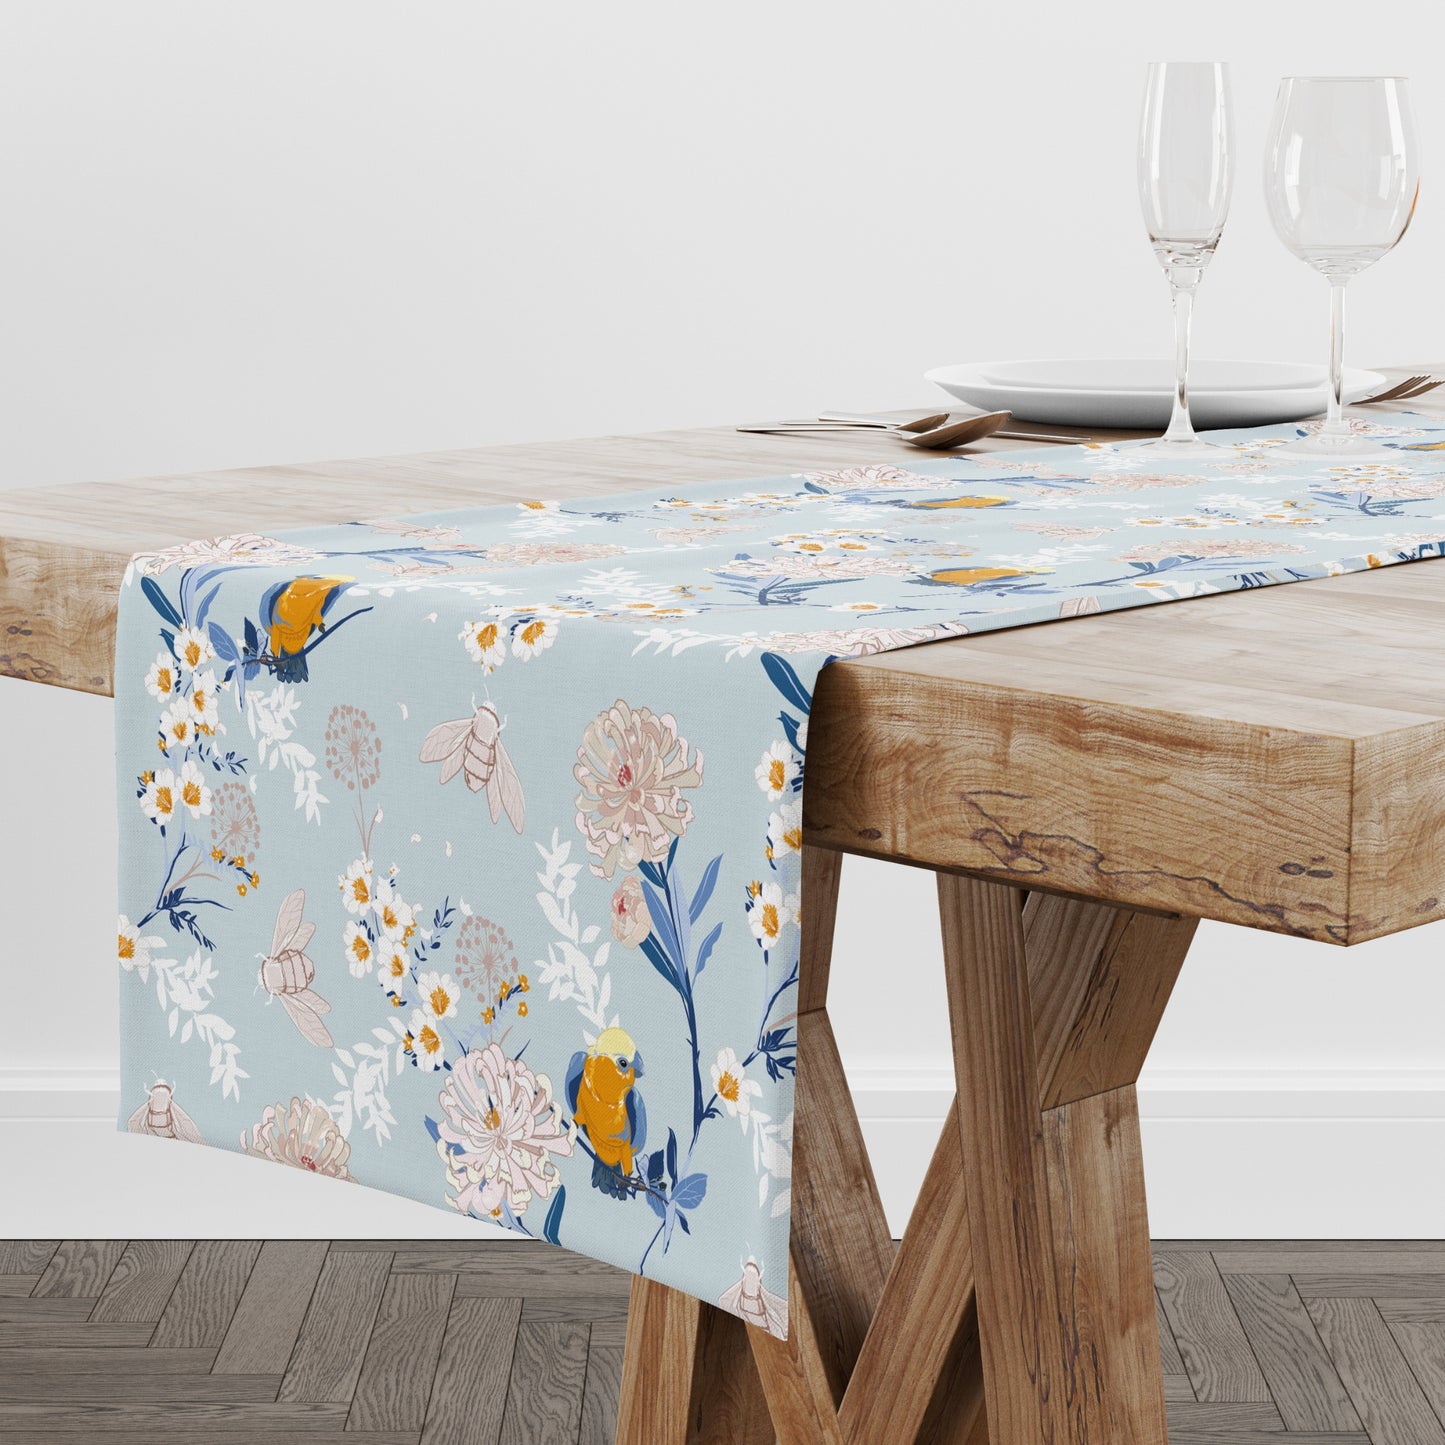 a table with a blue table cloth with flowers on it